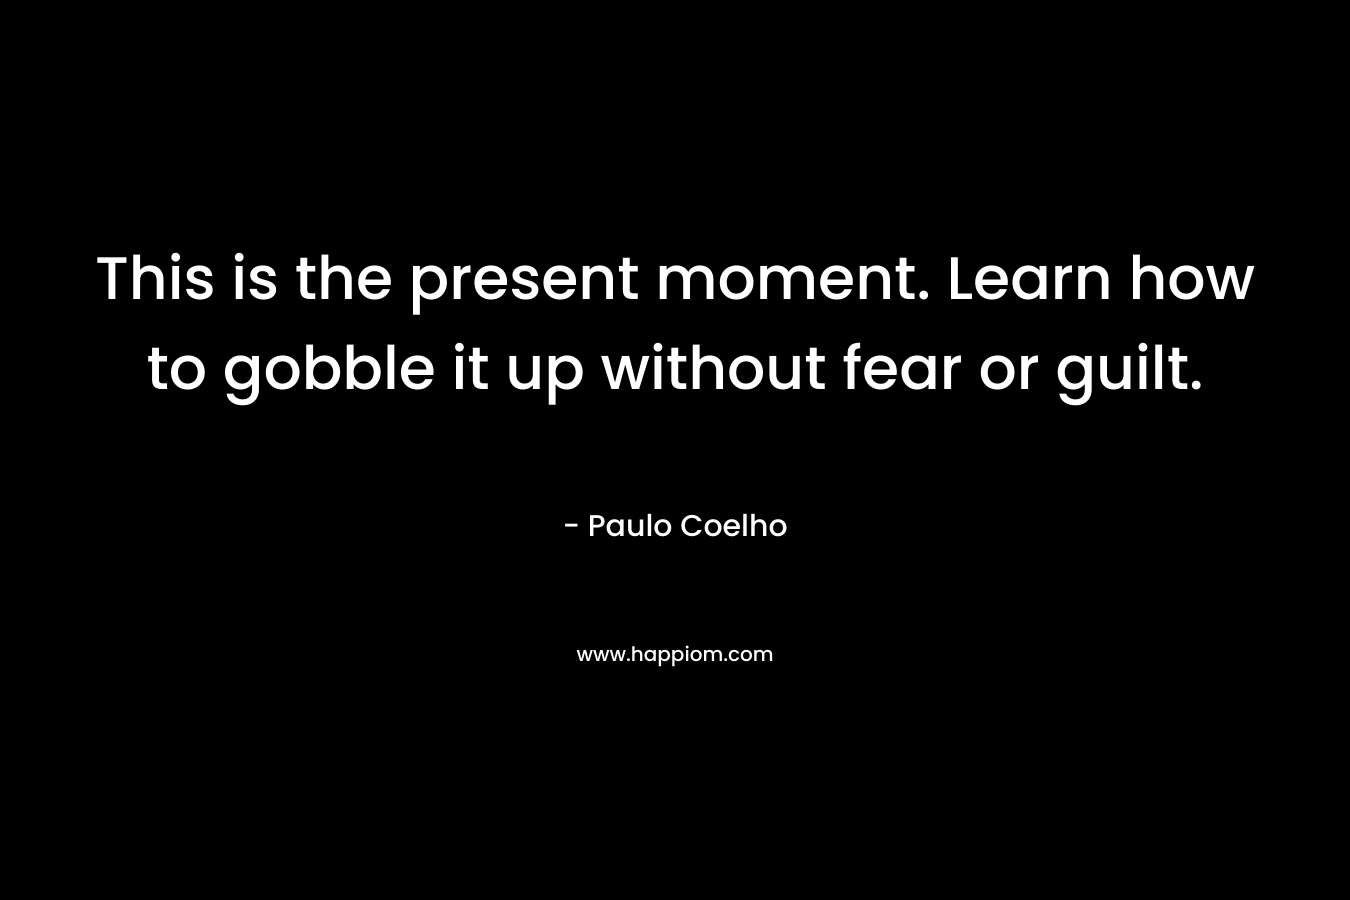 This is the present moment. Learn how to gobble it up without fear or guilt.